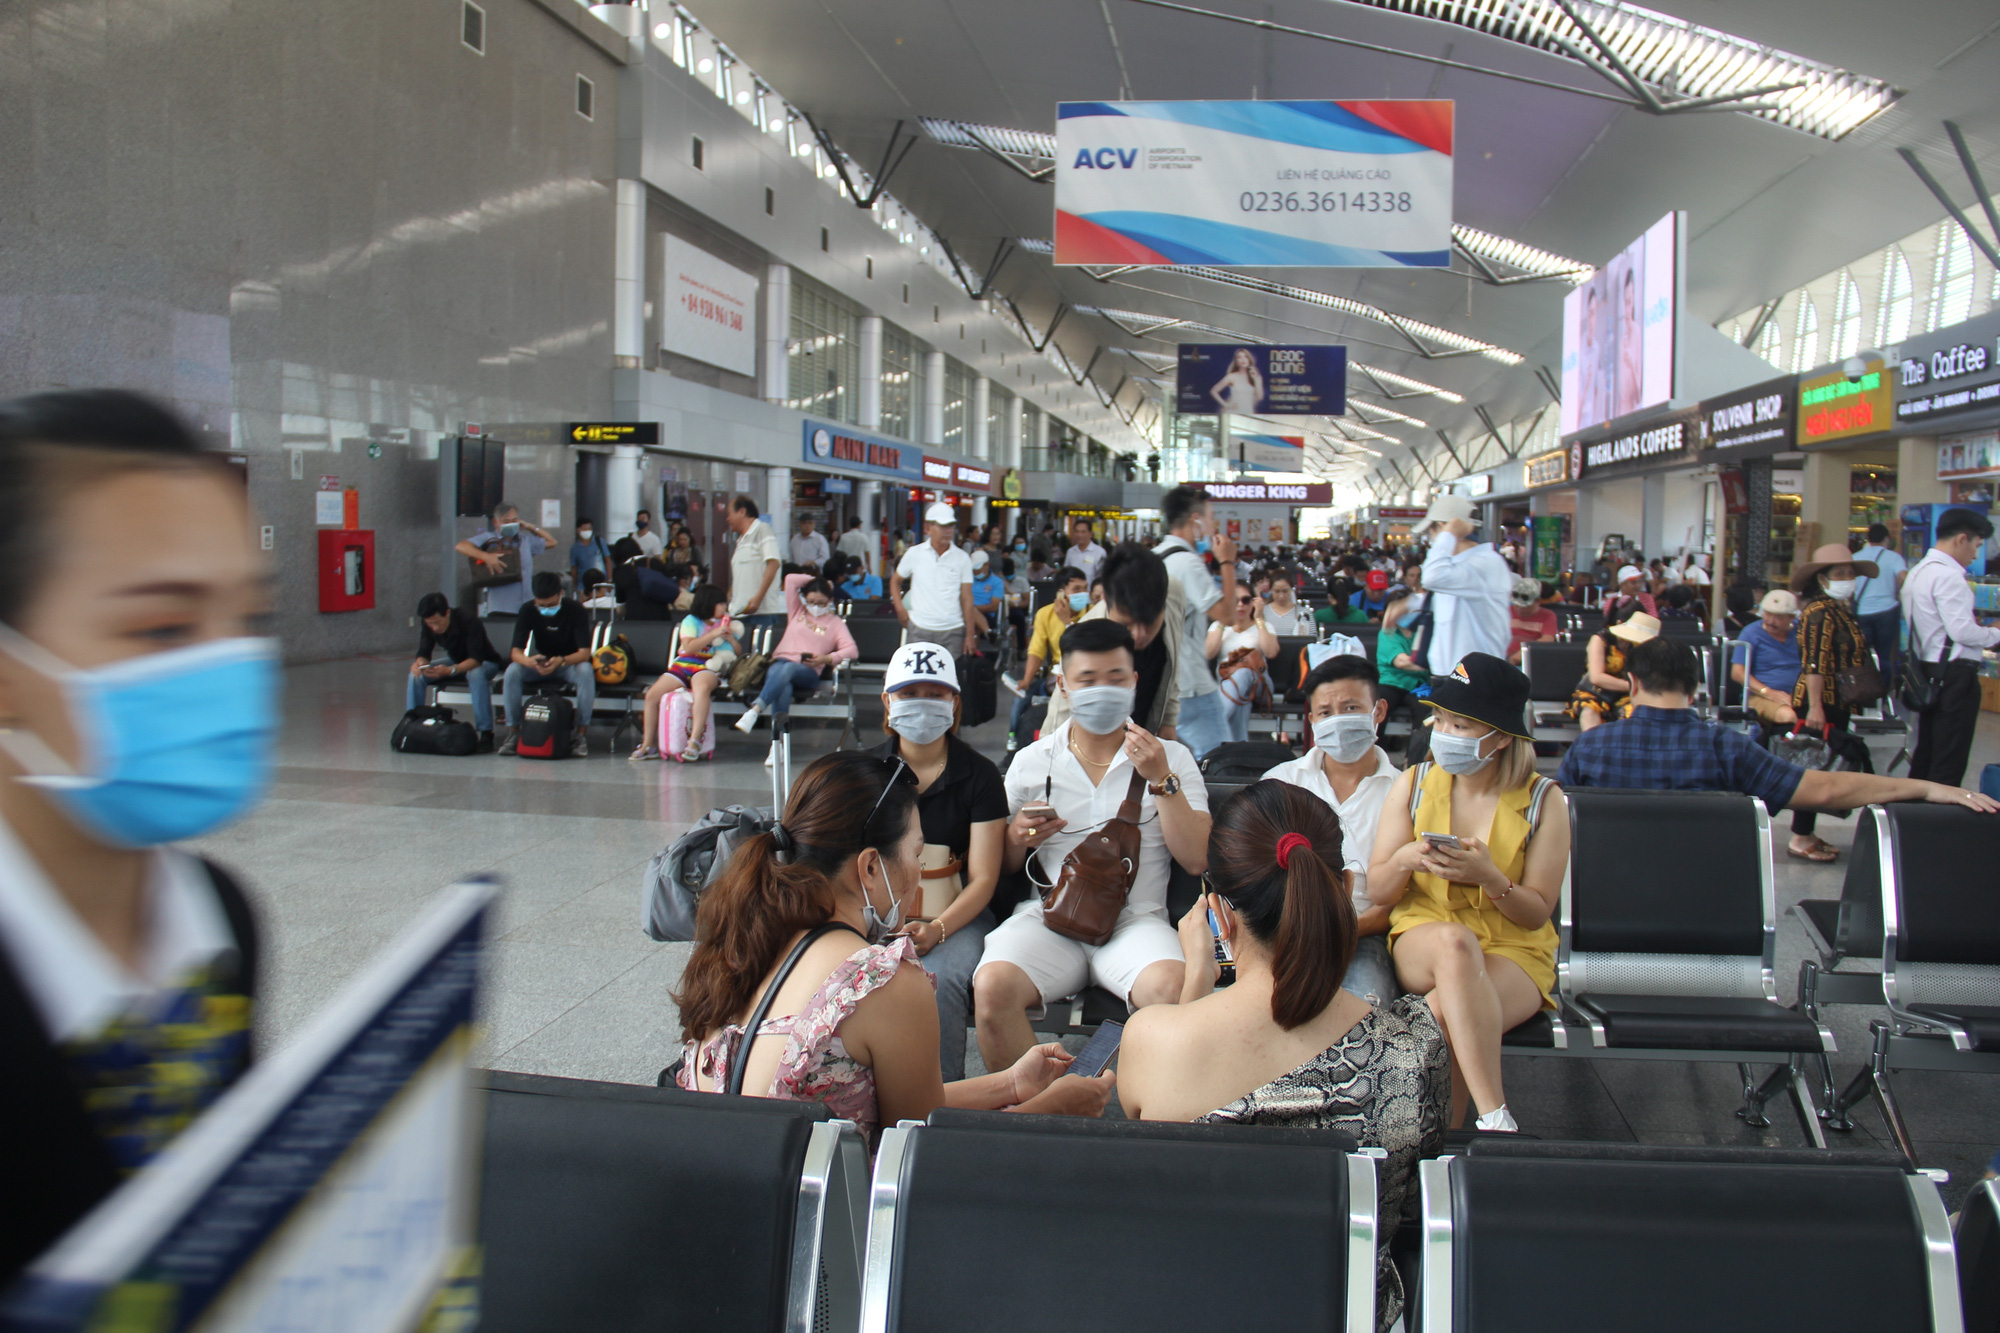 People wait for their flights at the domestic terminal of Da Nang International Airport in Da Nang City, Vietnam. Photo: Truong Trung / Tuoi Tre